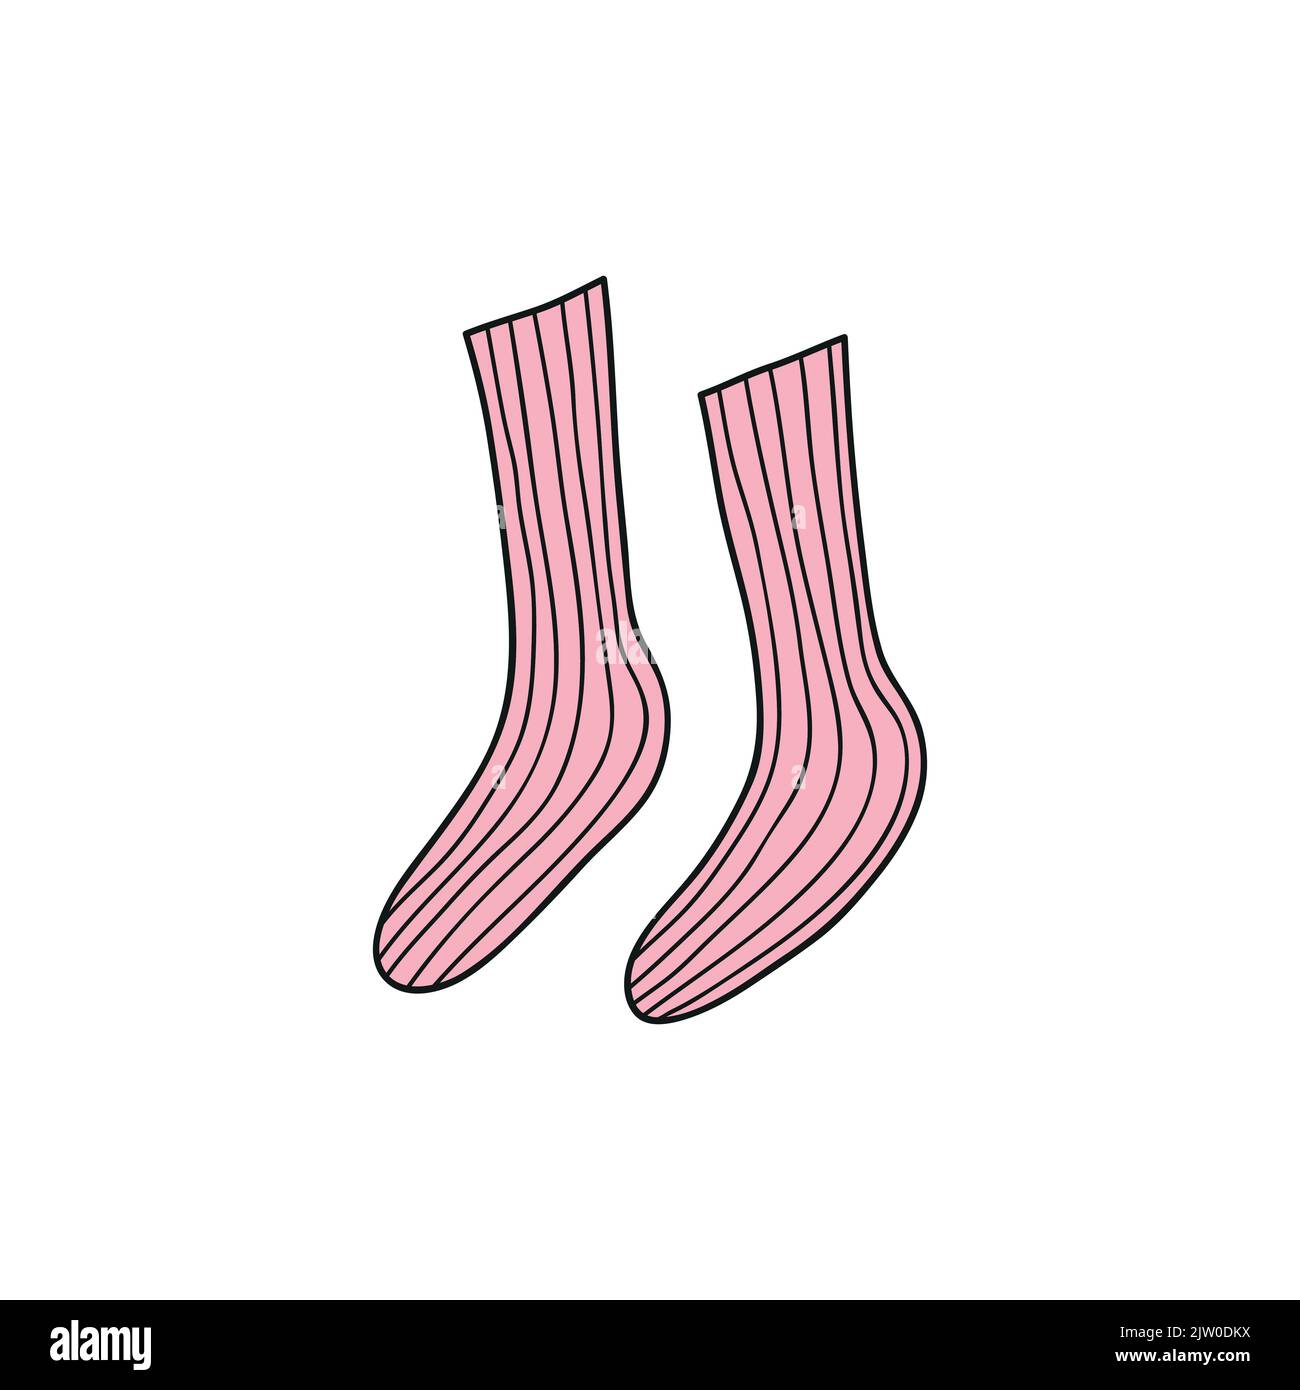 Hand drawn colored pink long socks isolated on white background. Stock Vector